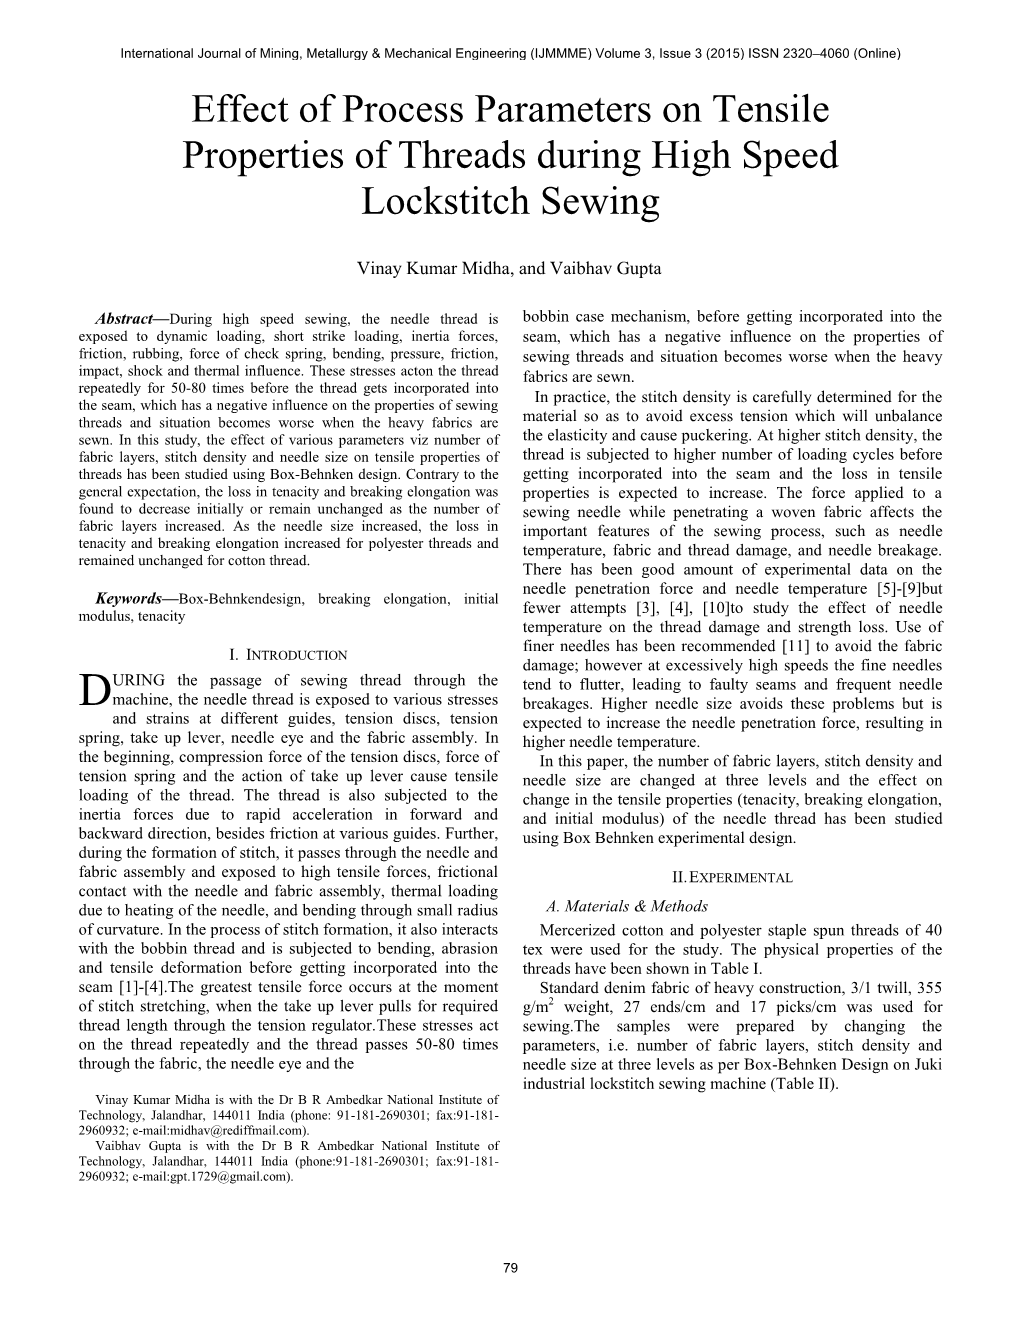 Effect of Process Parameters on Tensile Properties of Threads During High Speed Lockstitch Sewing